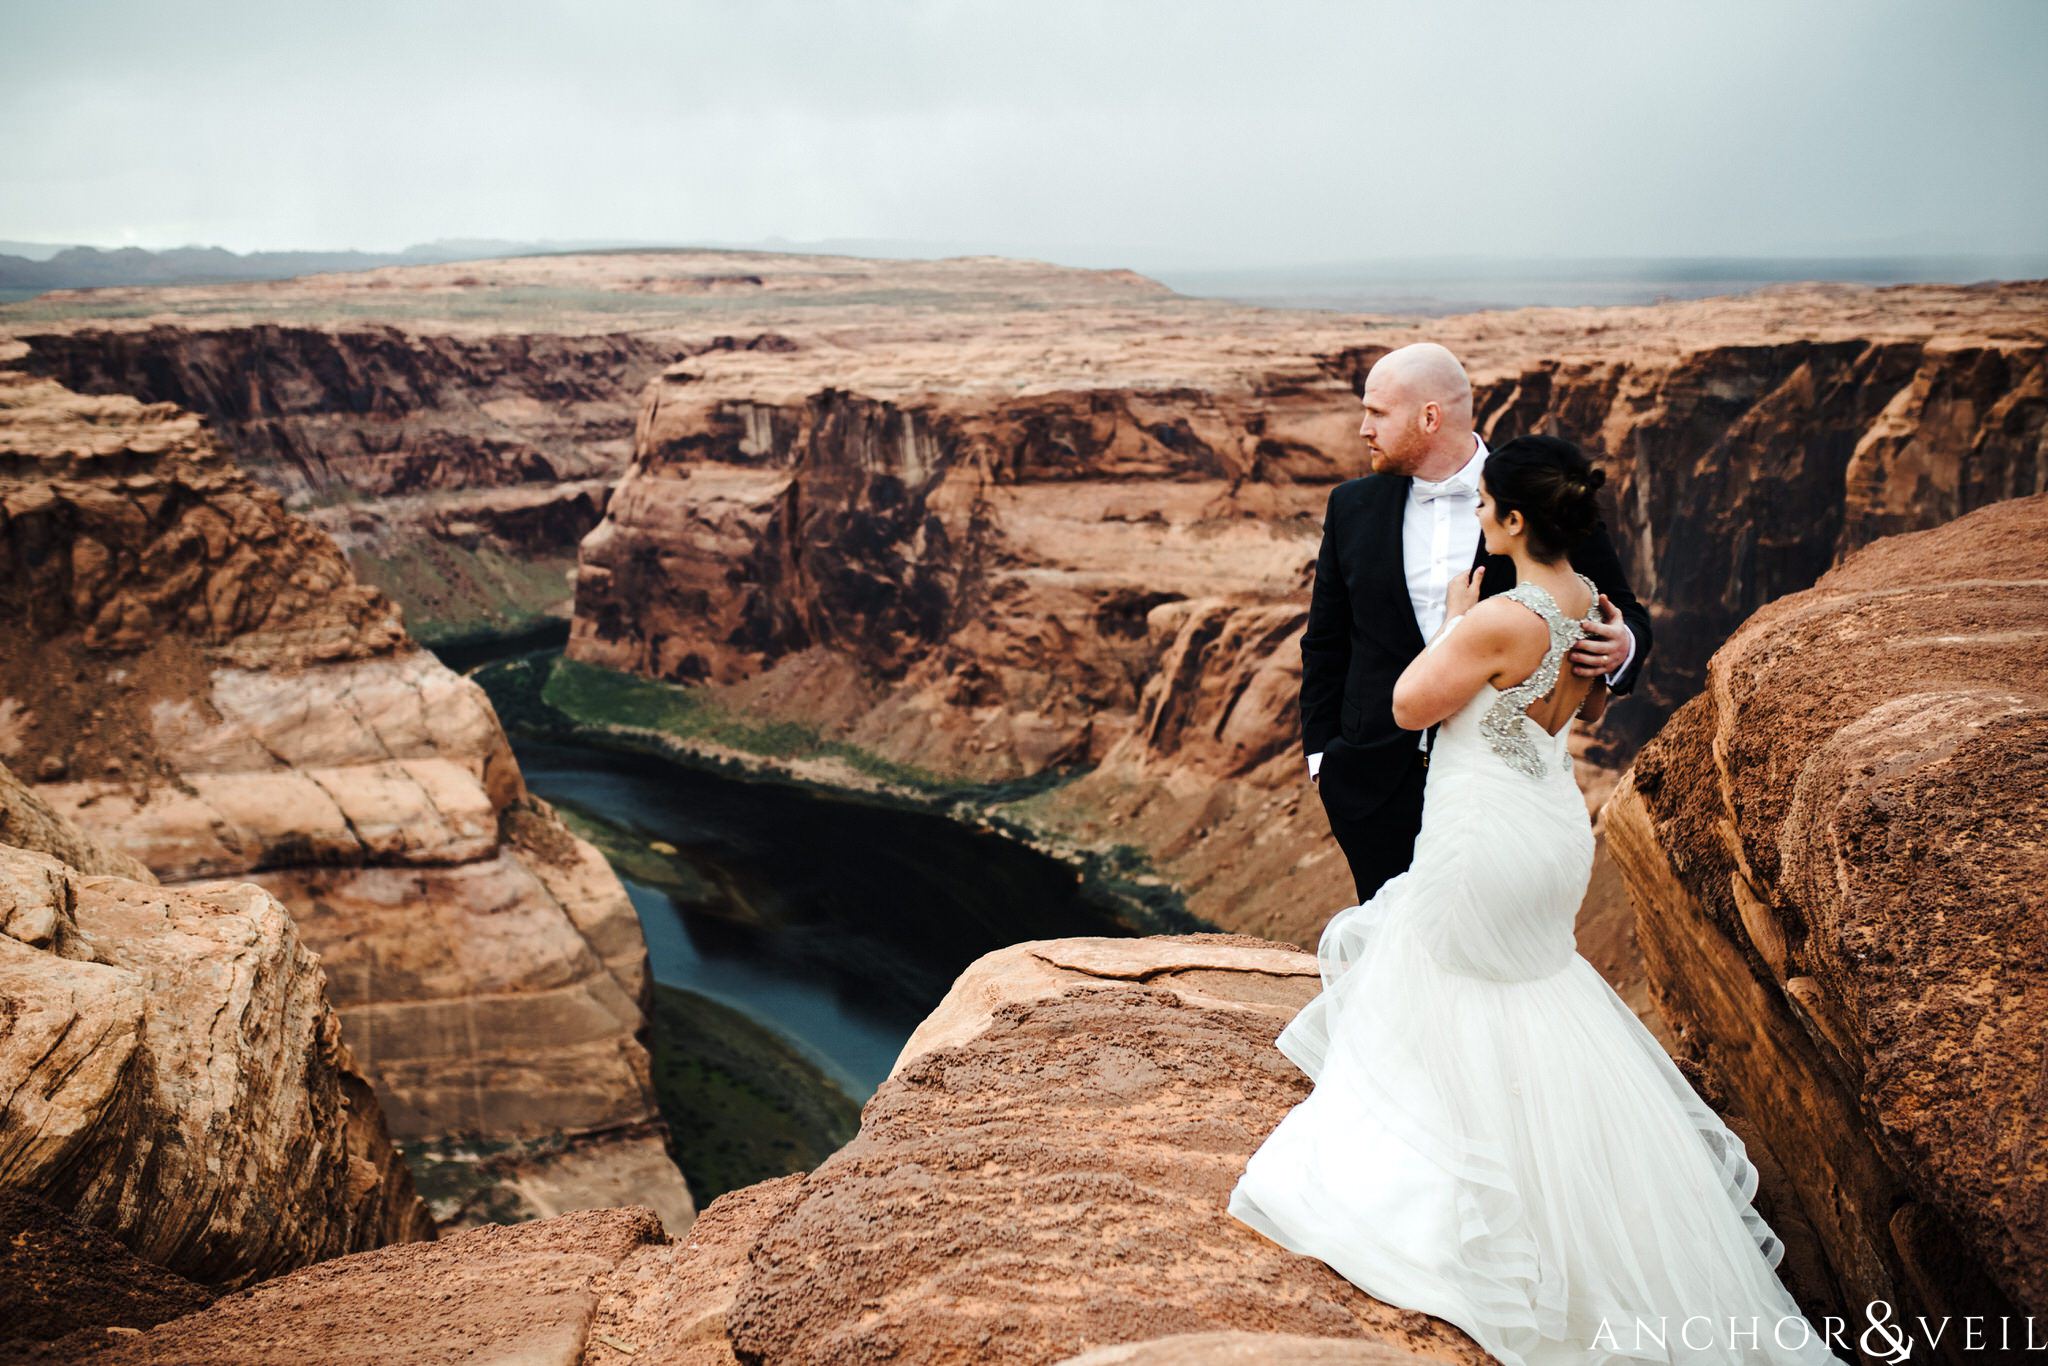 on the edge looking out during their Horseshoe Bend Elopement Wedding